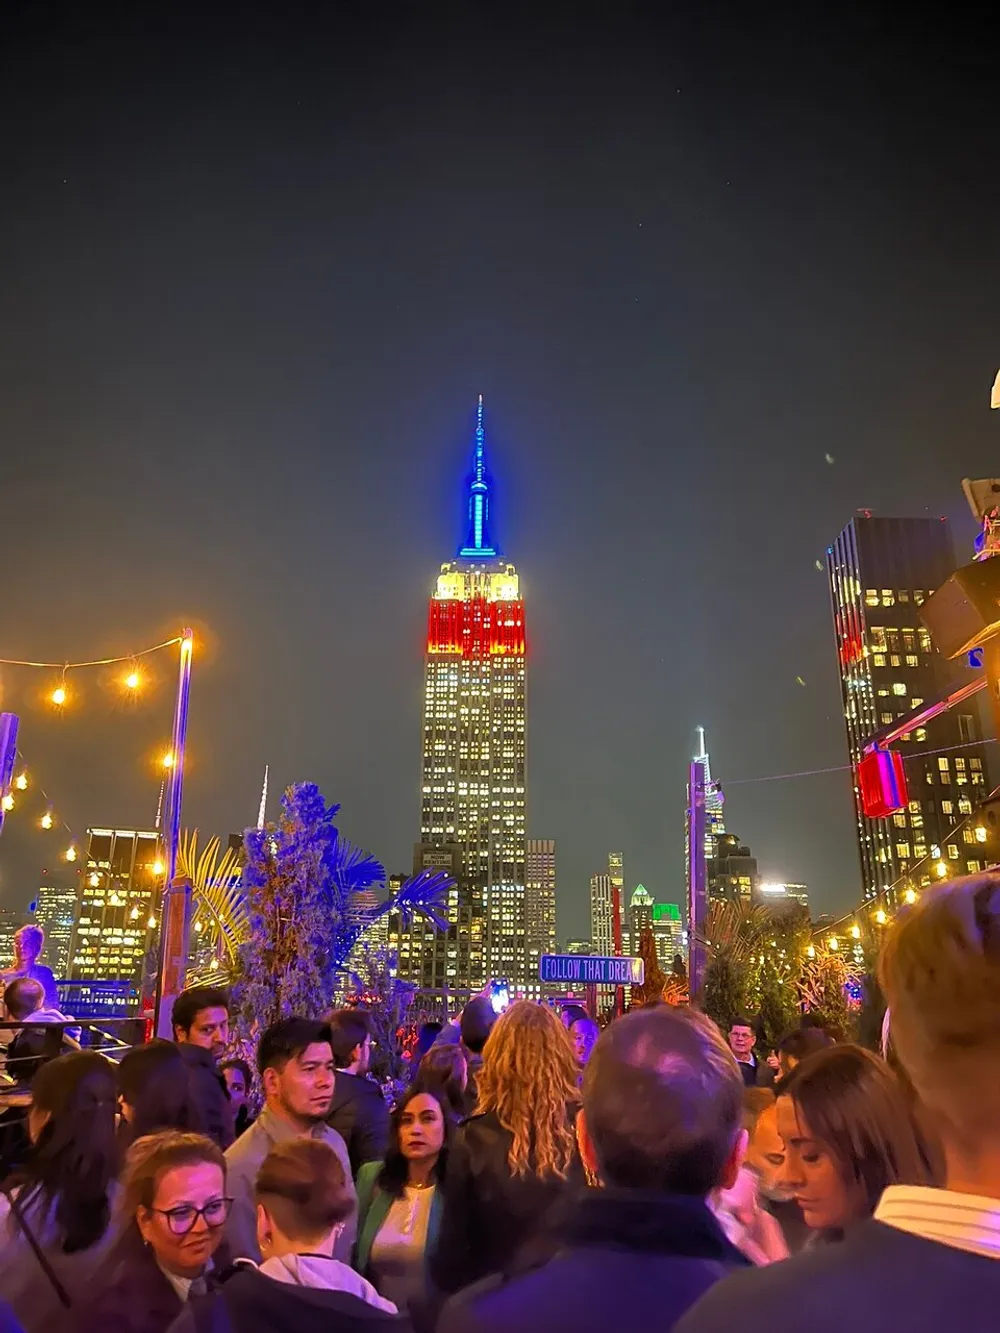 A bustling rooftop gathering with people socializing under the illuminated night sky with the Empire State Building prominent in the background